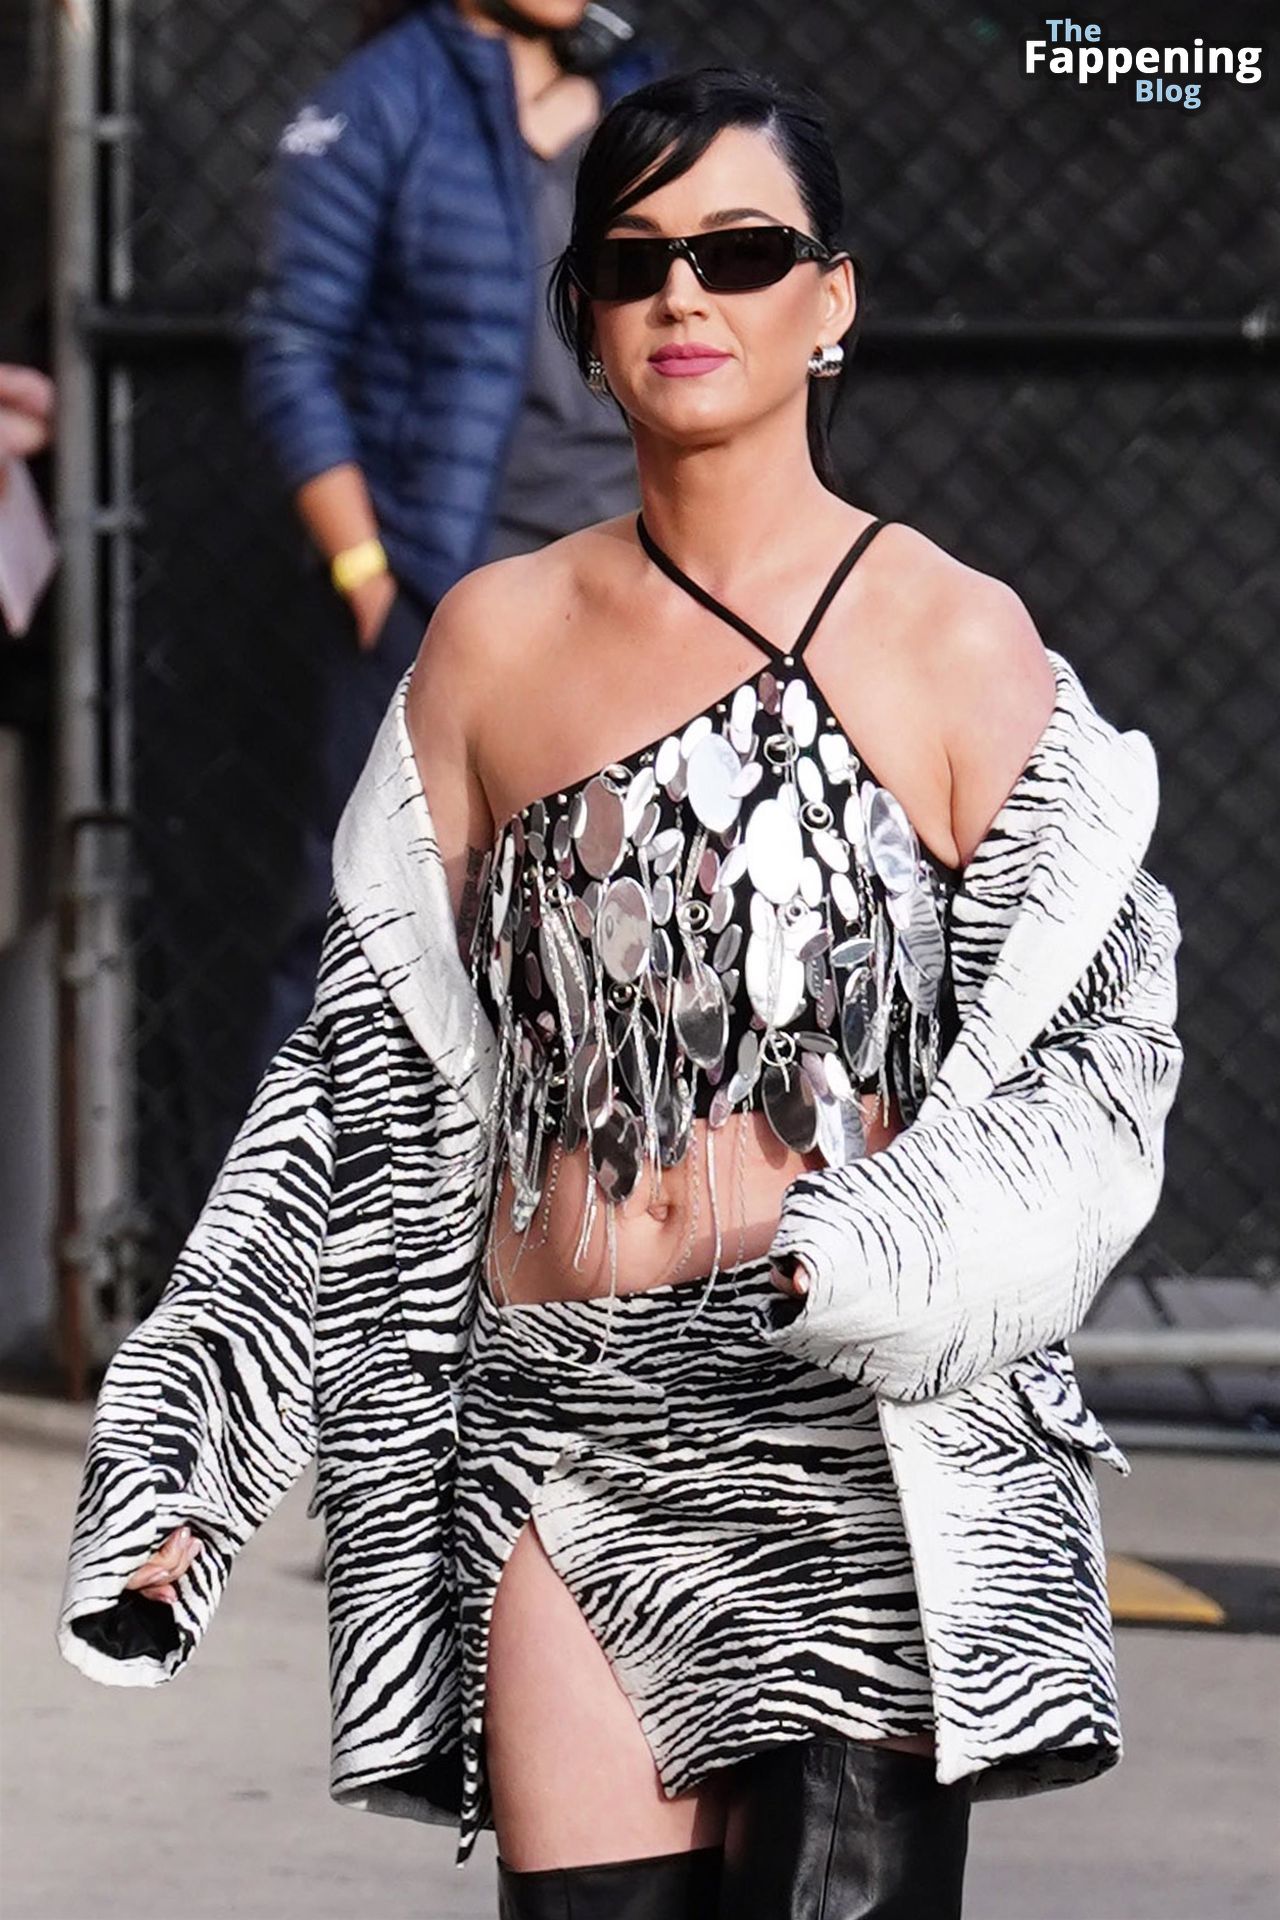 Katy Perry Sparkles in a Crop Top as she Heads Into Jimmy Kimmel Live Studio in Hollywood (112 New Photos)